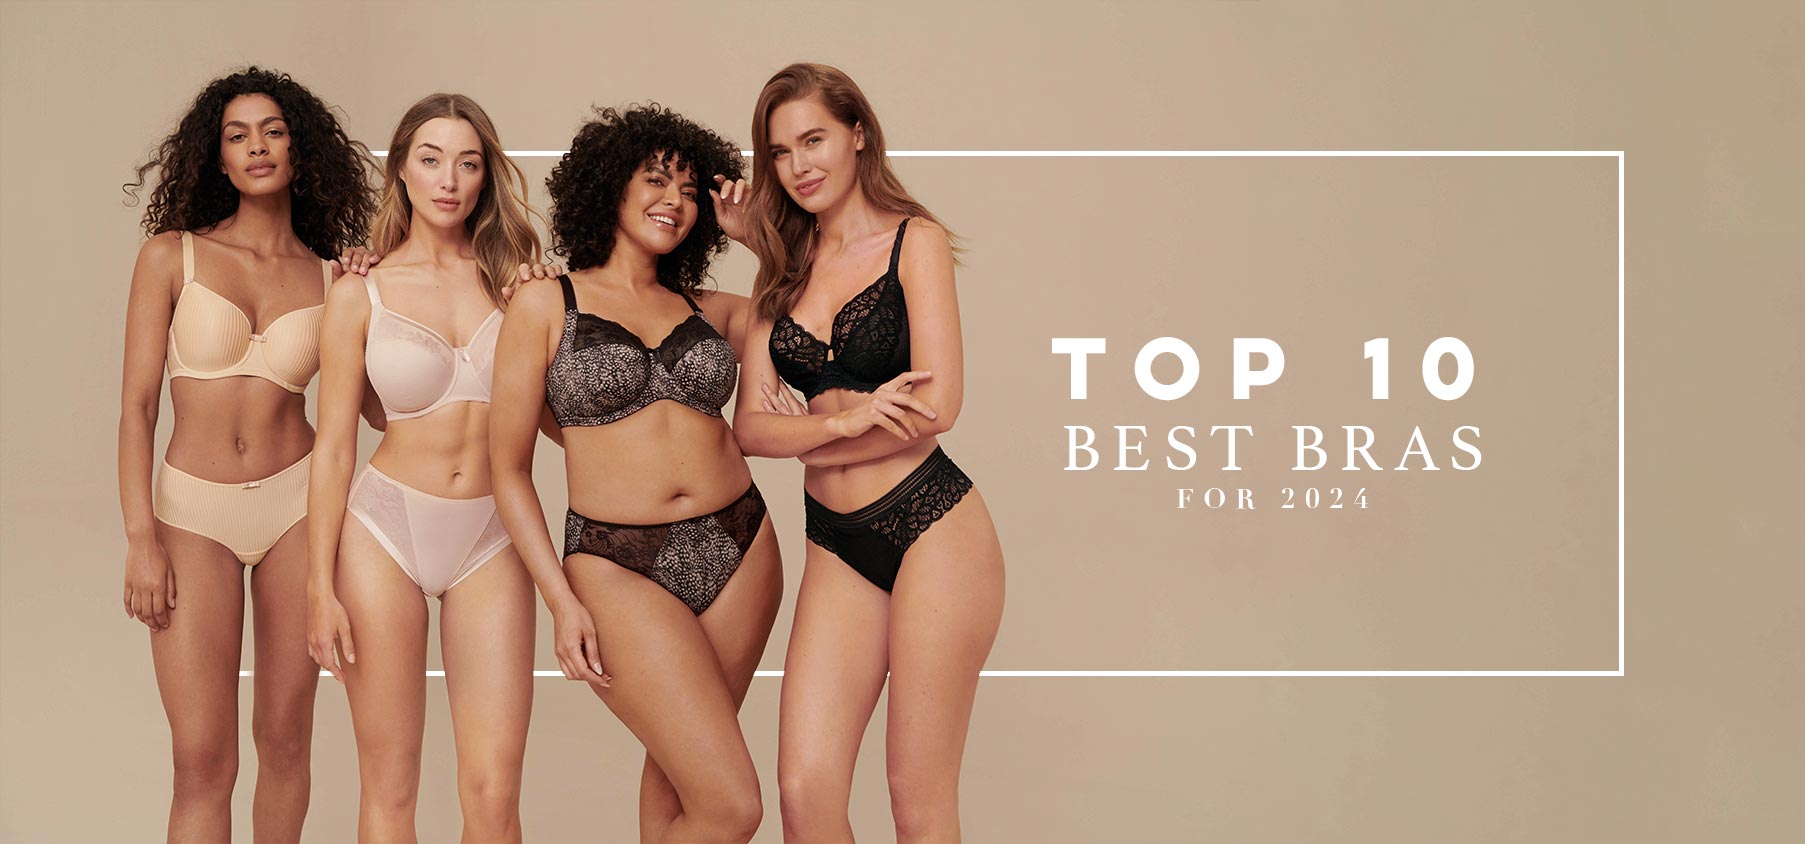 Women In Lingerie For The Cover Of The Best Bras For 2024